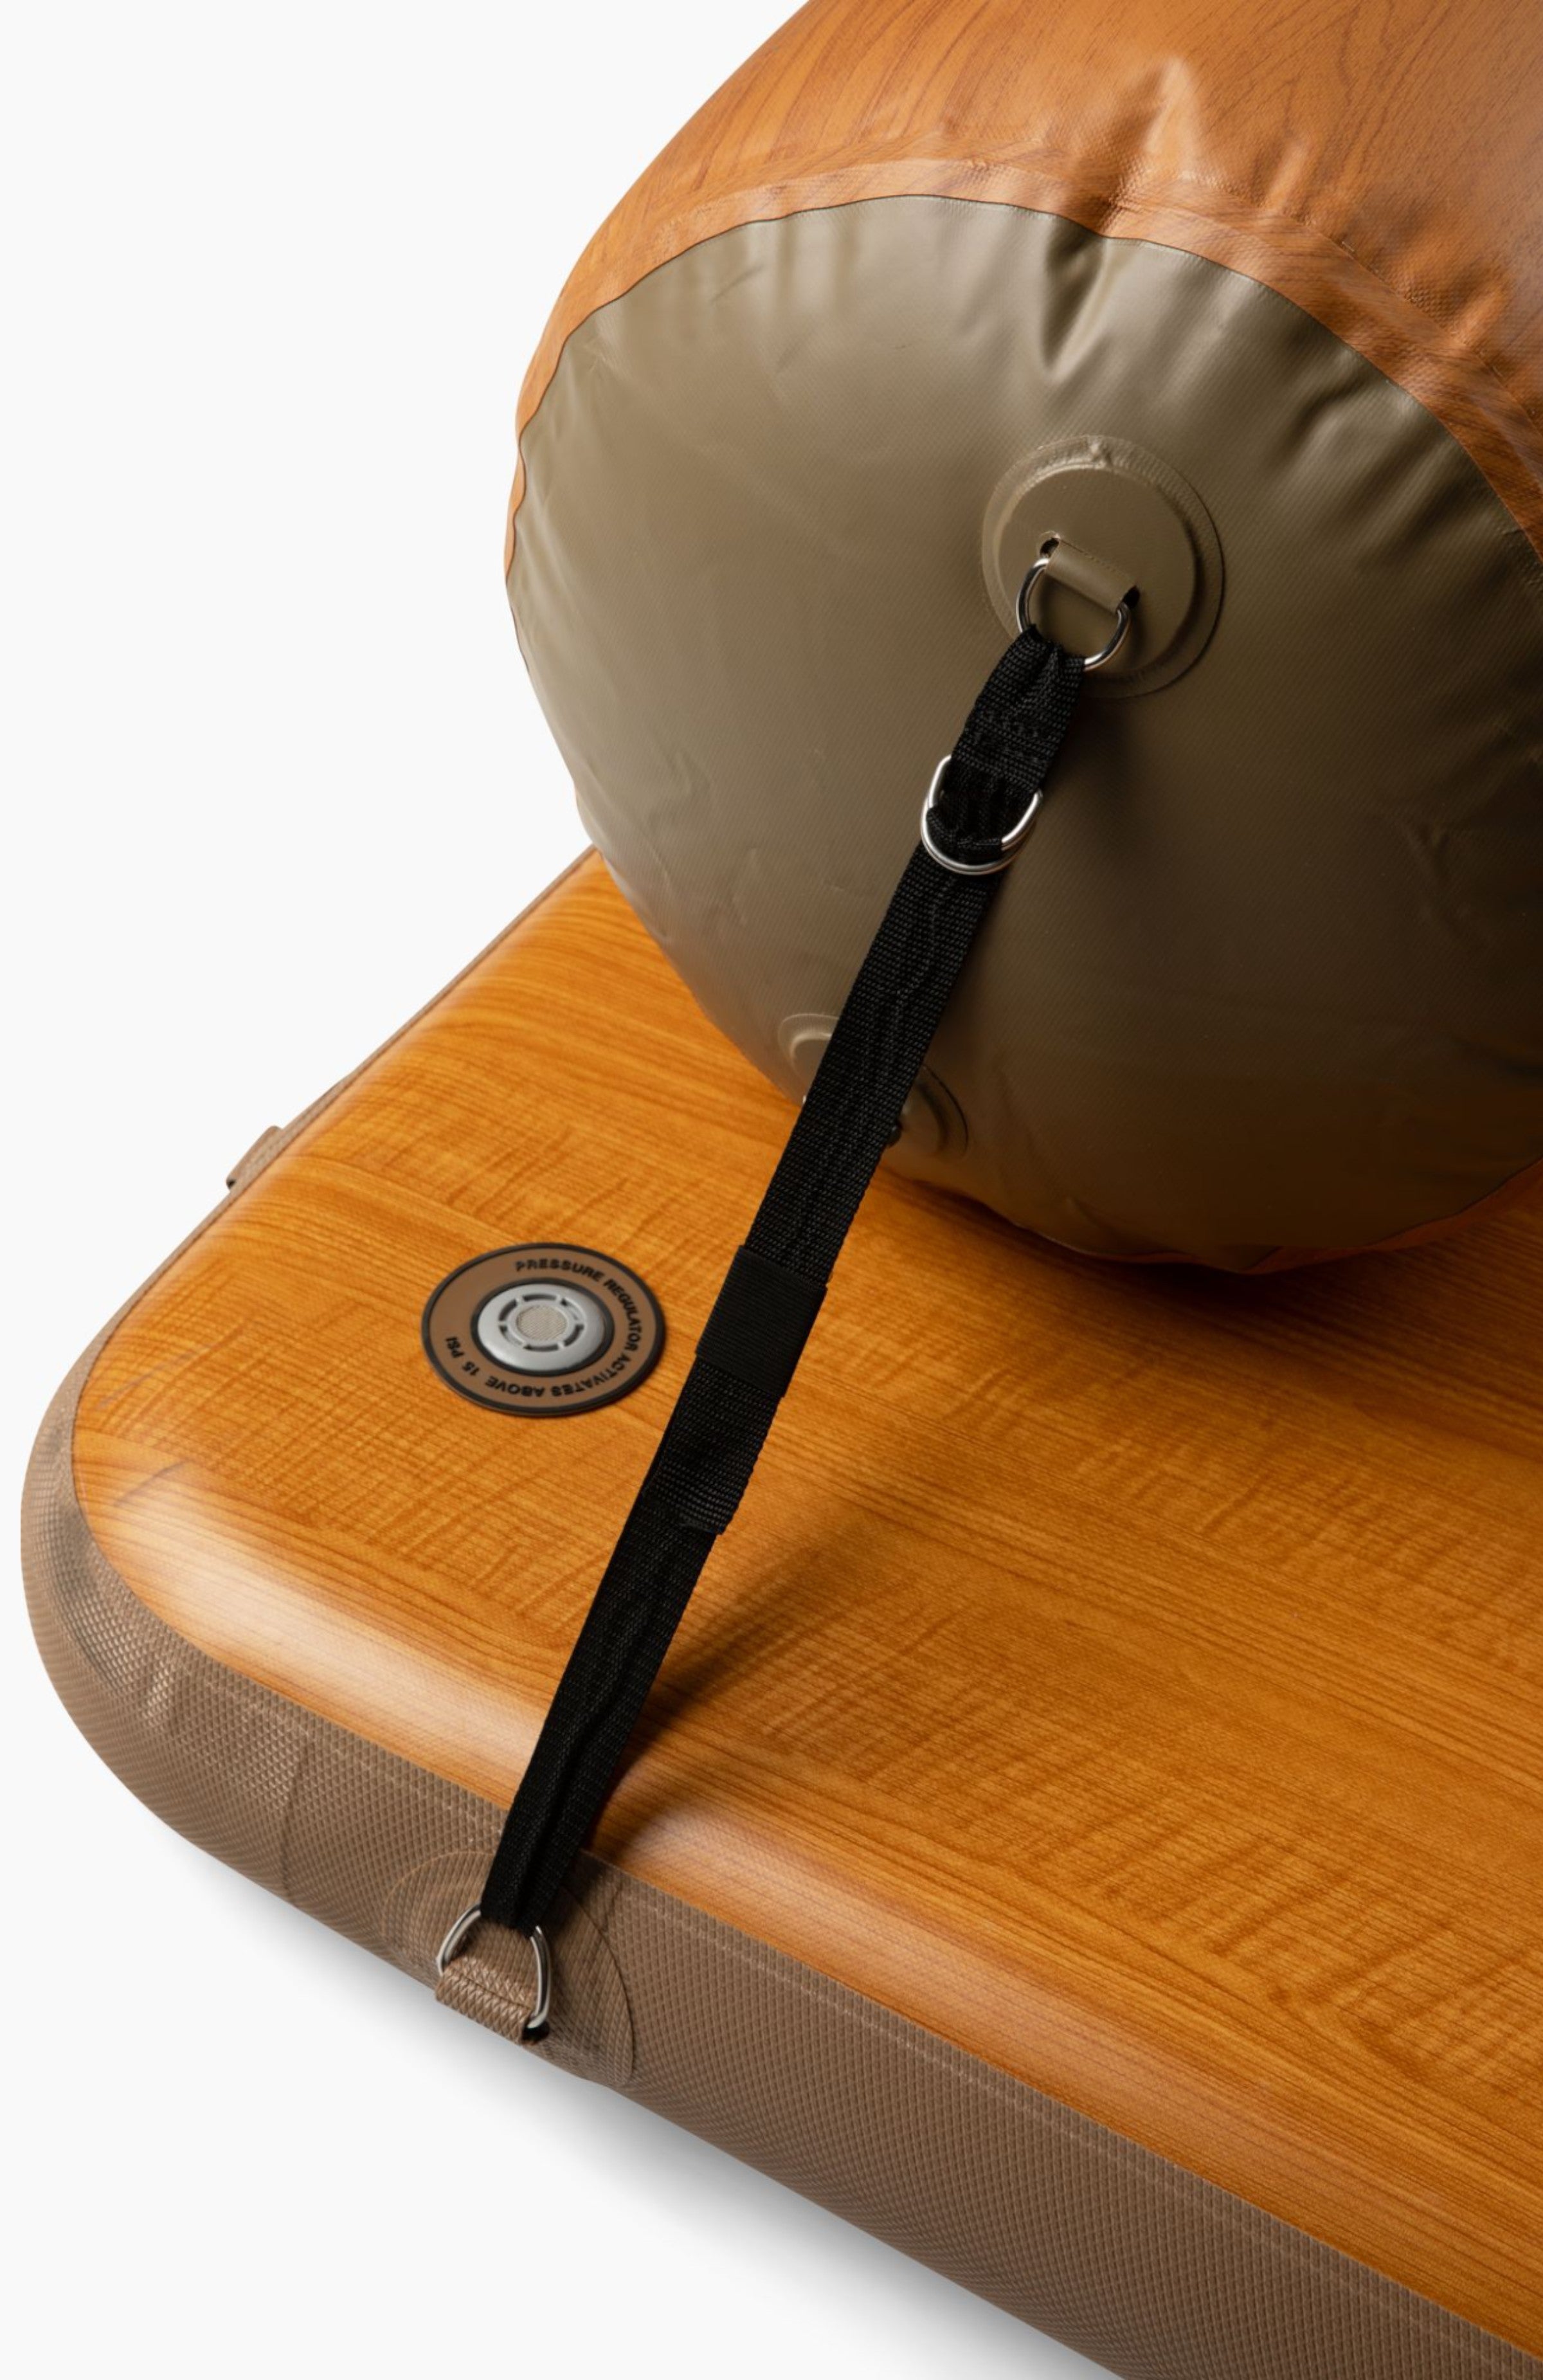 Dock accessories: a dock log installed on a paddle north raft showcasing the strap and rings.